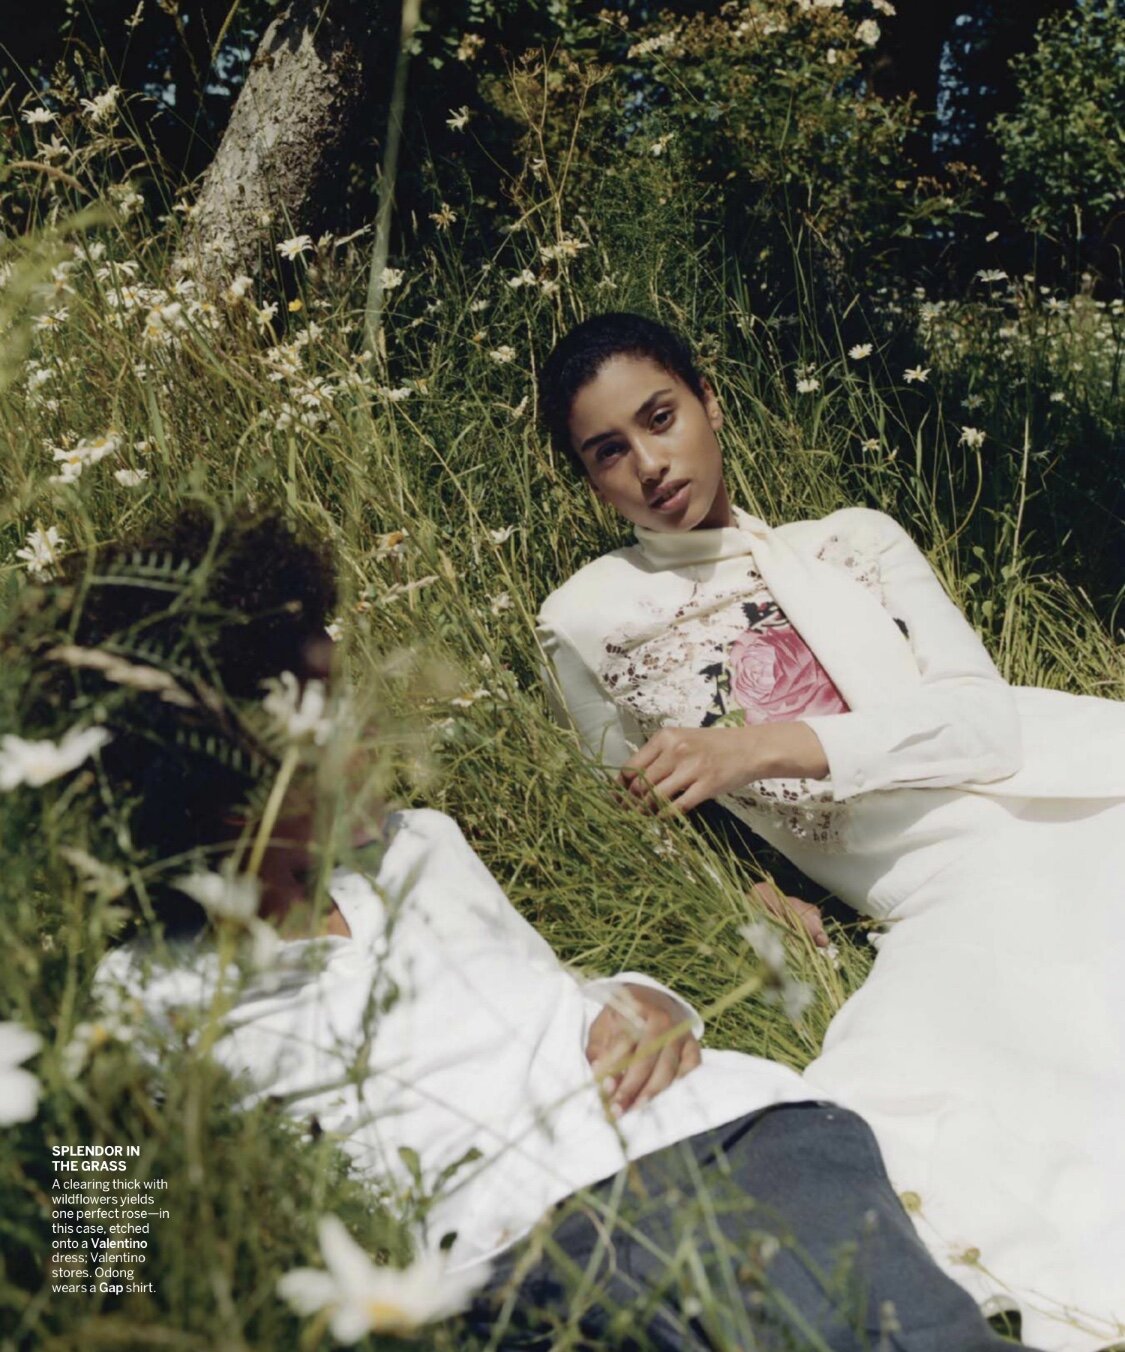 Imaan Hannam by Tyler Mitchell in Blooming Anew for Vogue US Sept 2019 (6).jpg